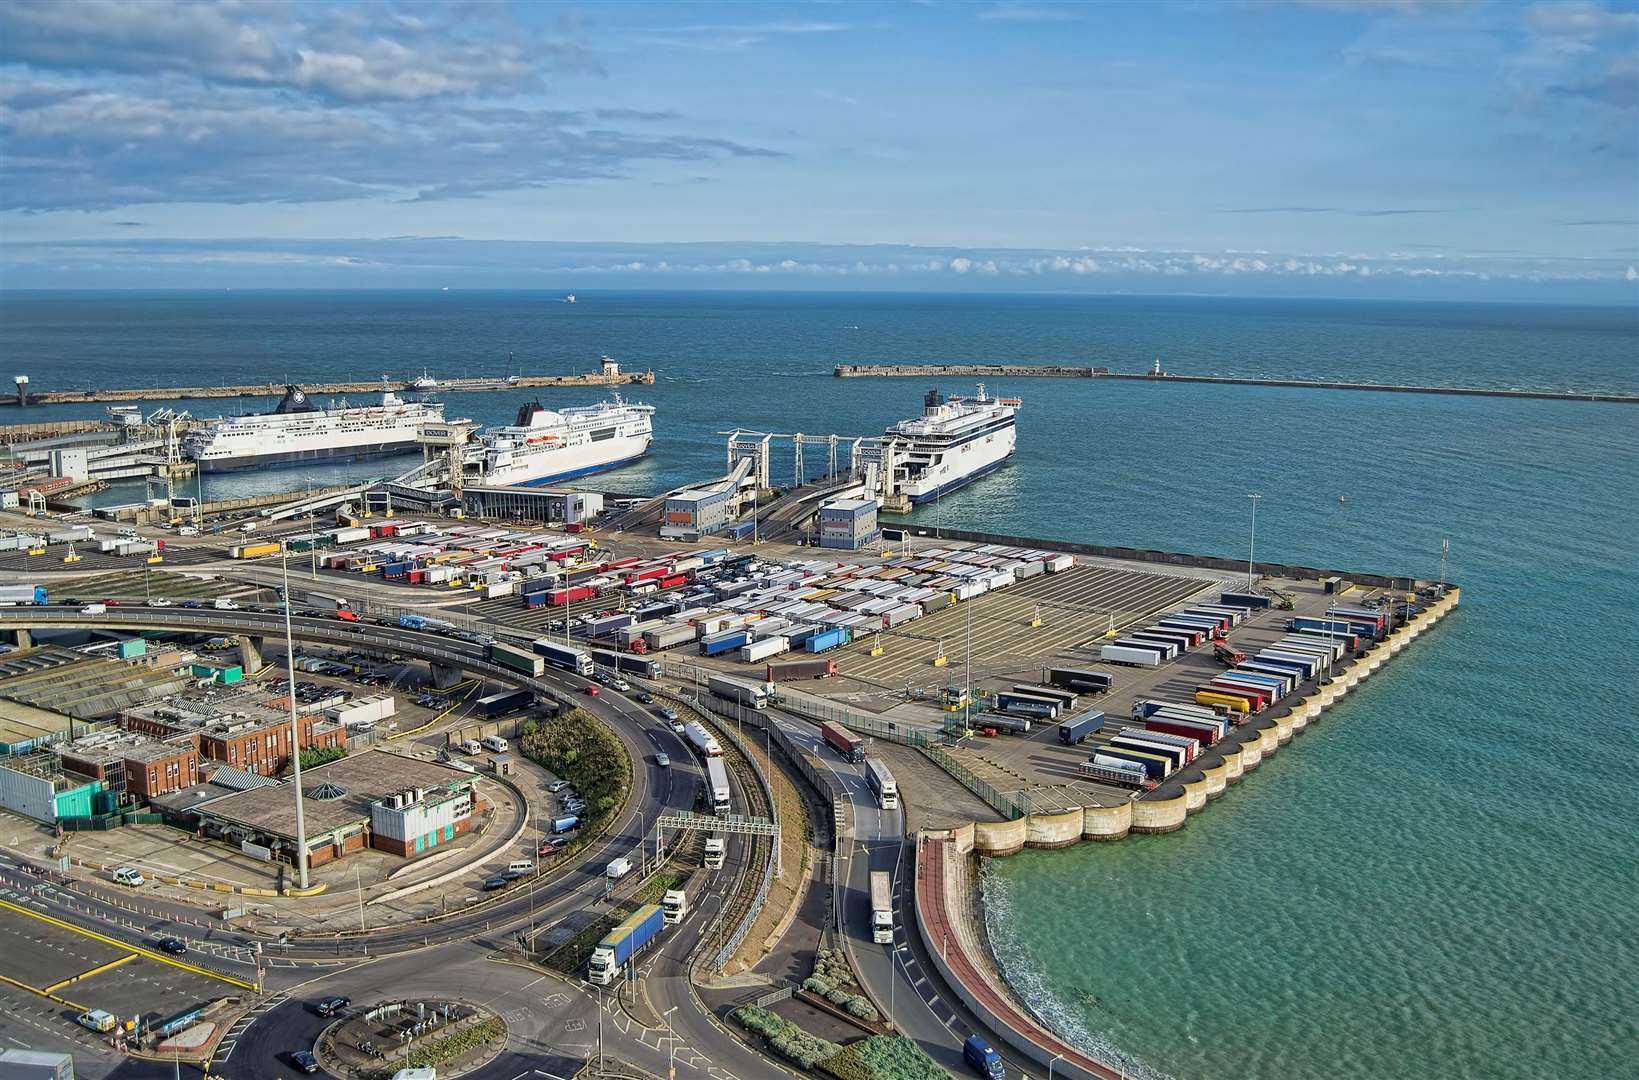 Important checks are carried out at the Port of Dover on imported foods